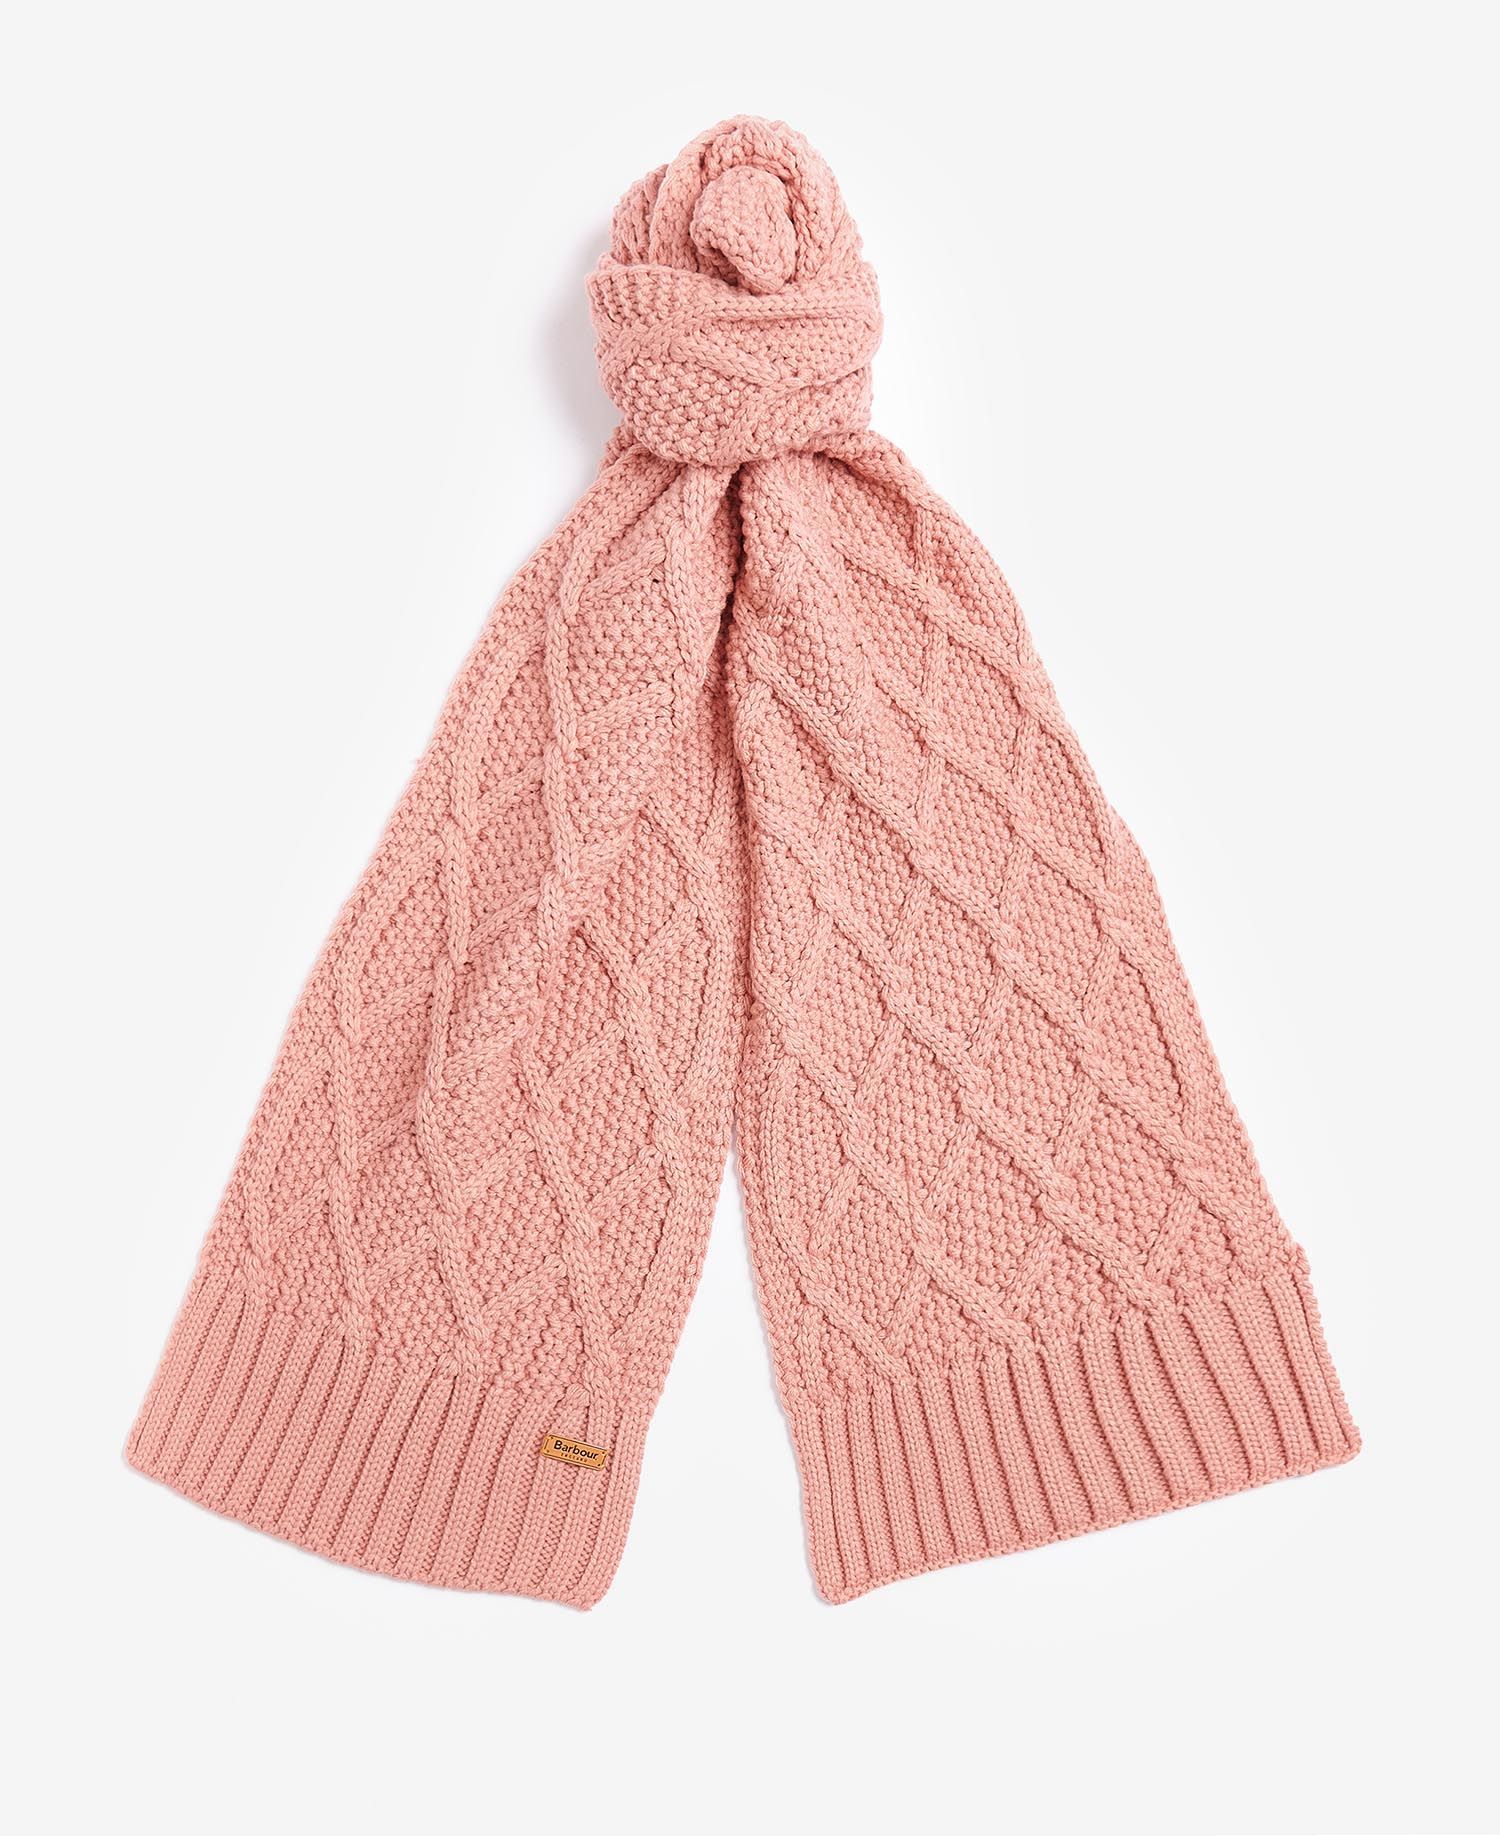 Barbour Ridley Beanie & Scarf Set - Dusty Pink